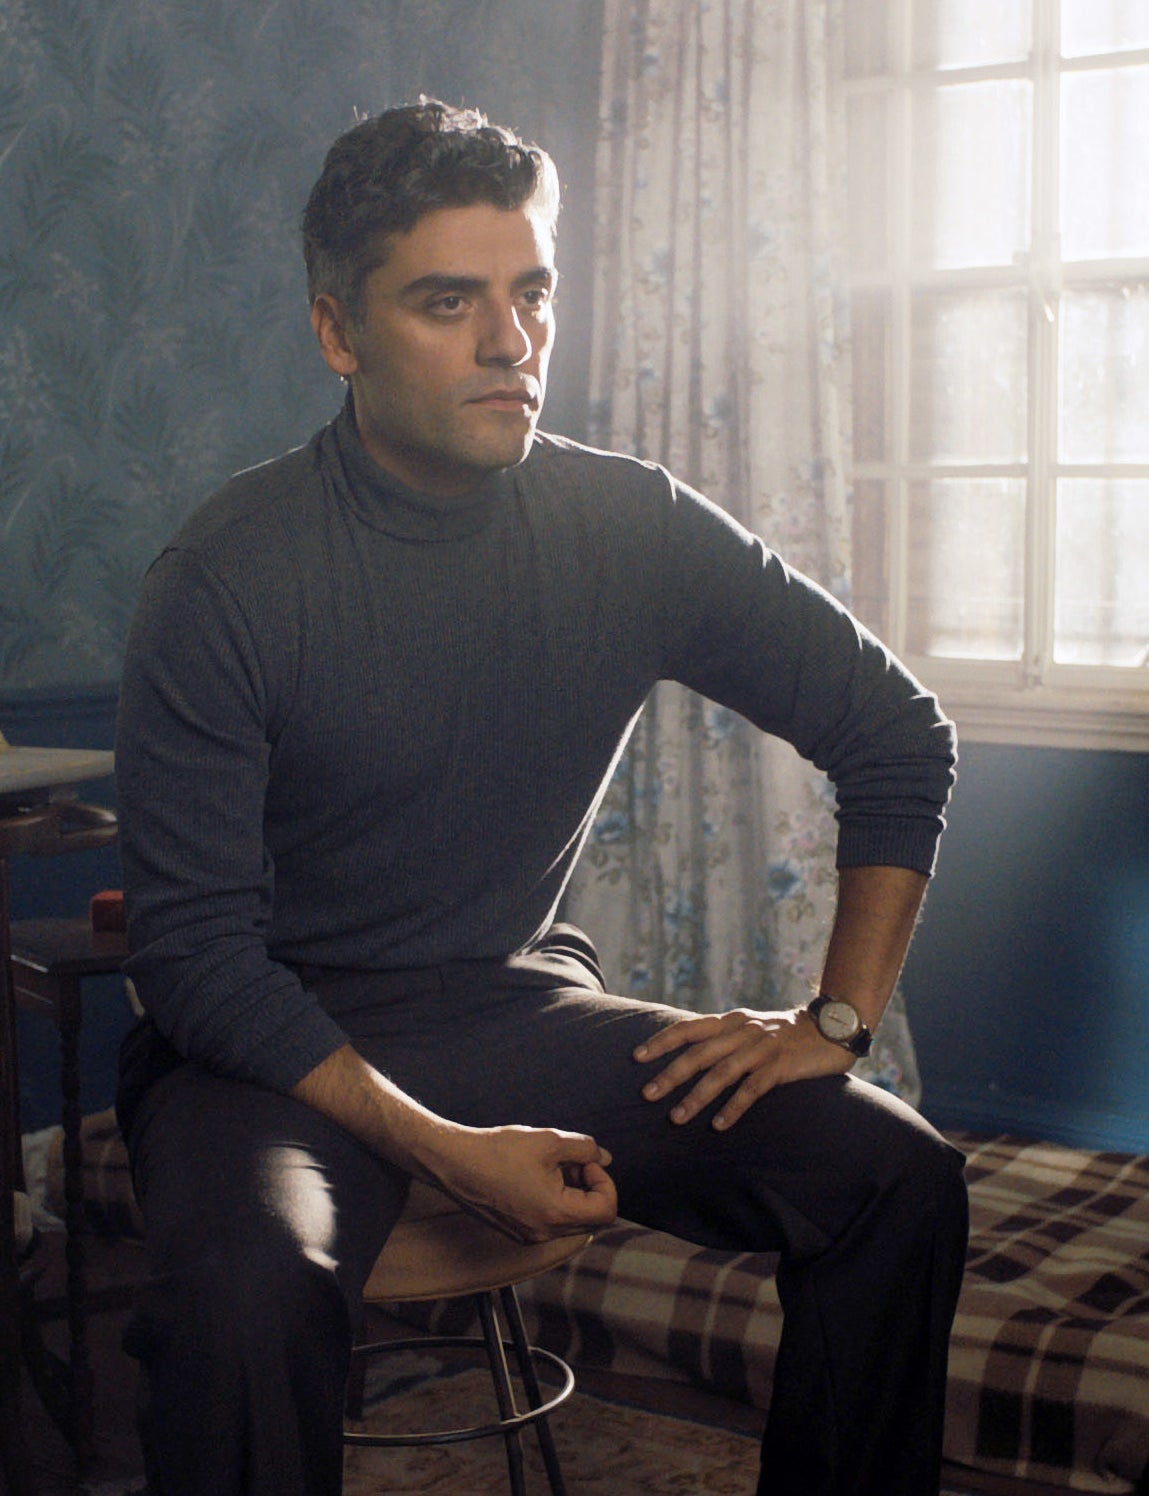 Oscar Isaac wearing a turtleneck and looking pensive